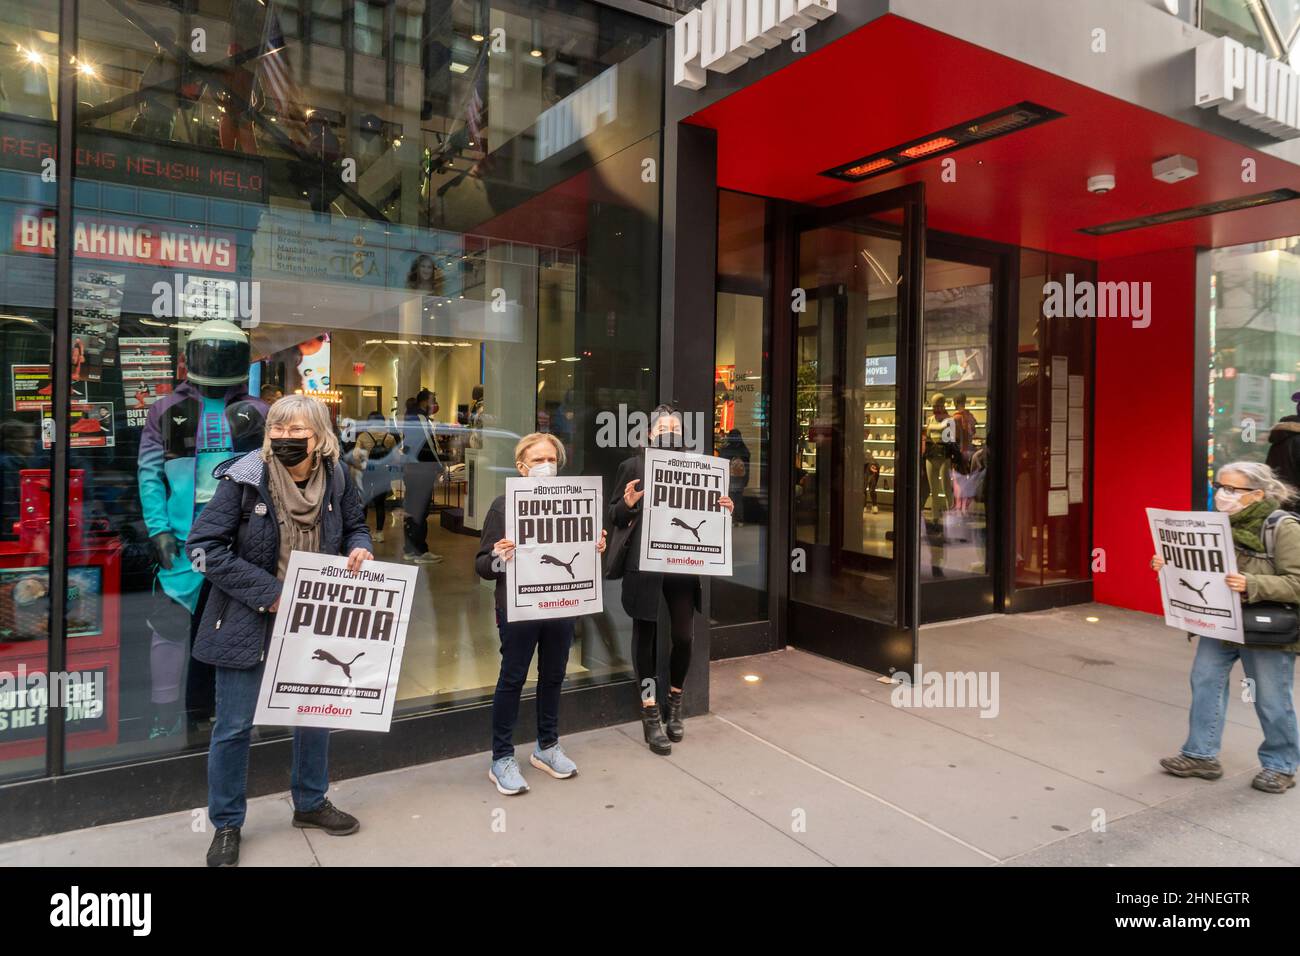 Members and supporters of Samidoun, the Palestinian Prisoner Solidarity Network, protest in front of the Puma store on Fifth Avenue in New York on Saturday, February 12, 2022. The activists are a calling for a boycott of the German athletic wear company objecting to their sponsorship of the Israeli Soccer Association.  (© Richard B. Levine) Stock Photo